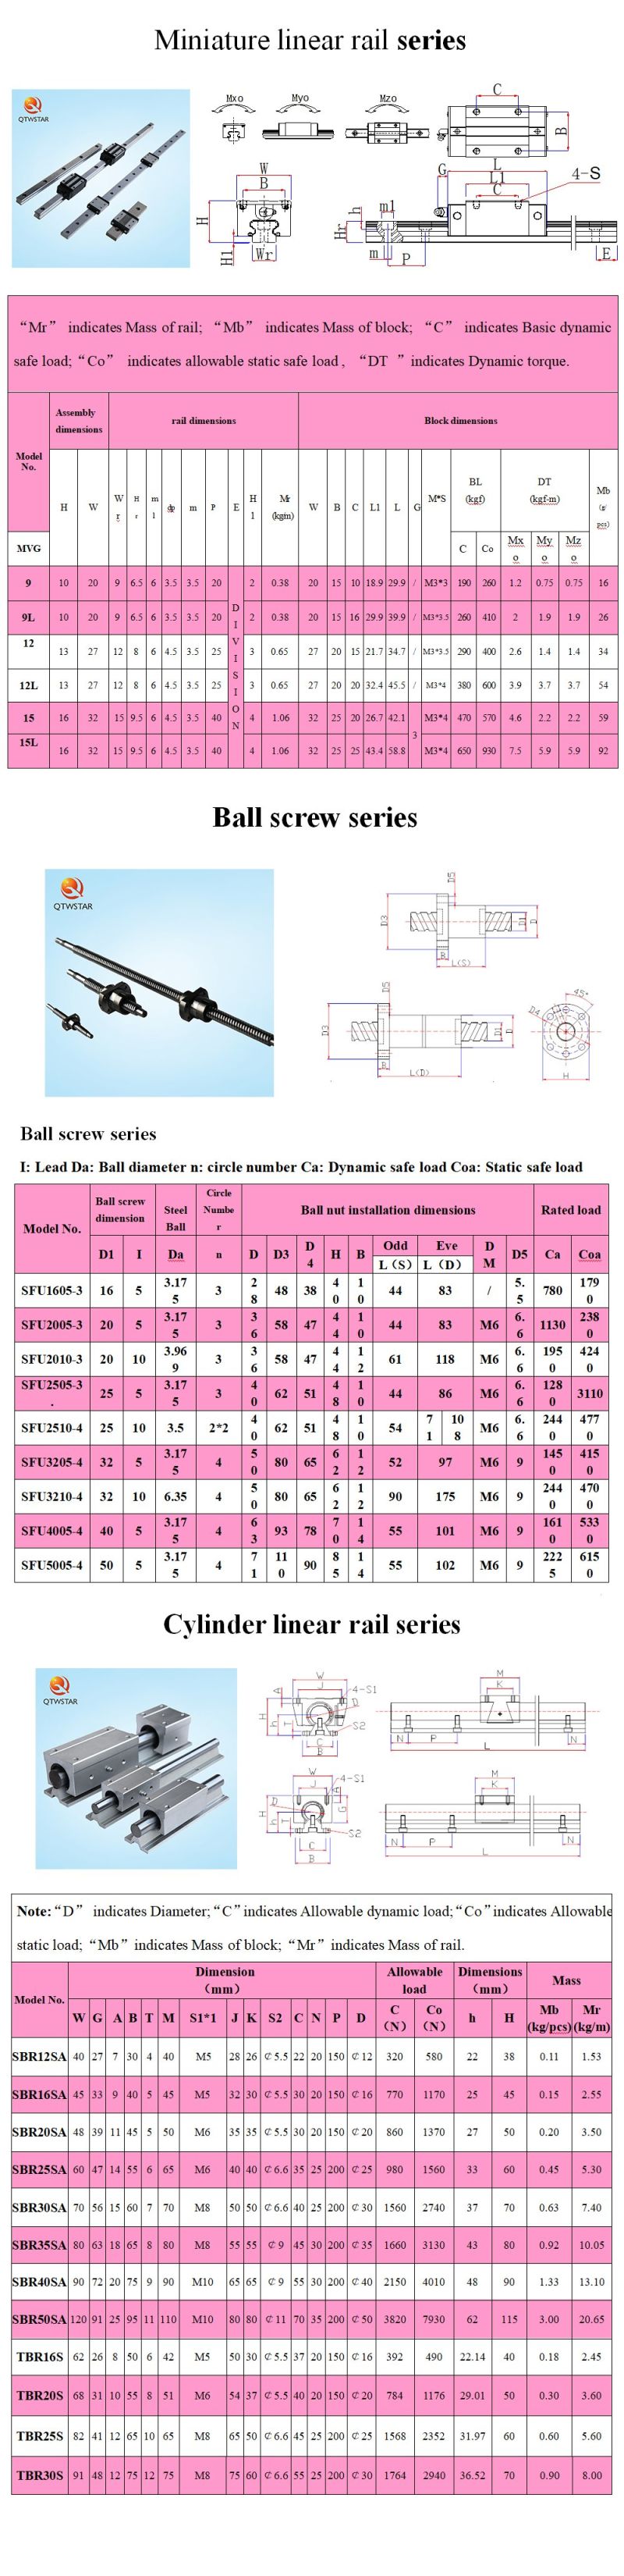 Power Consumption for Driving Torque of Ball Screw